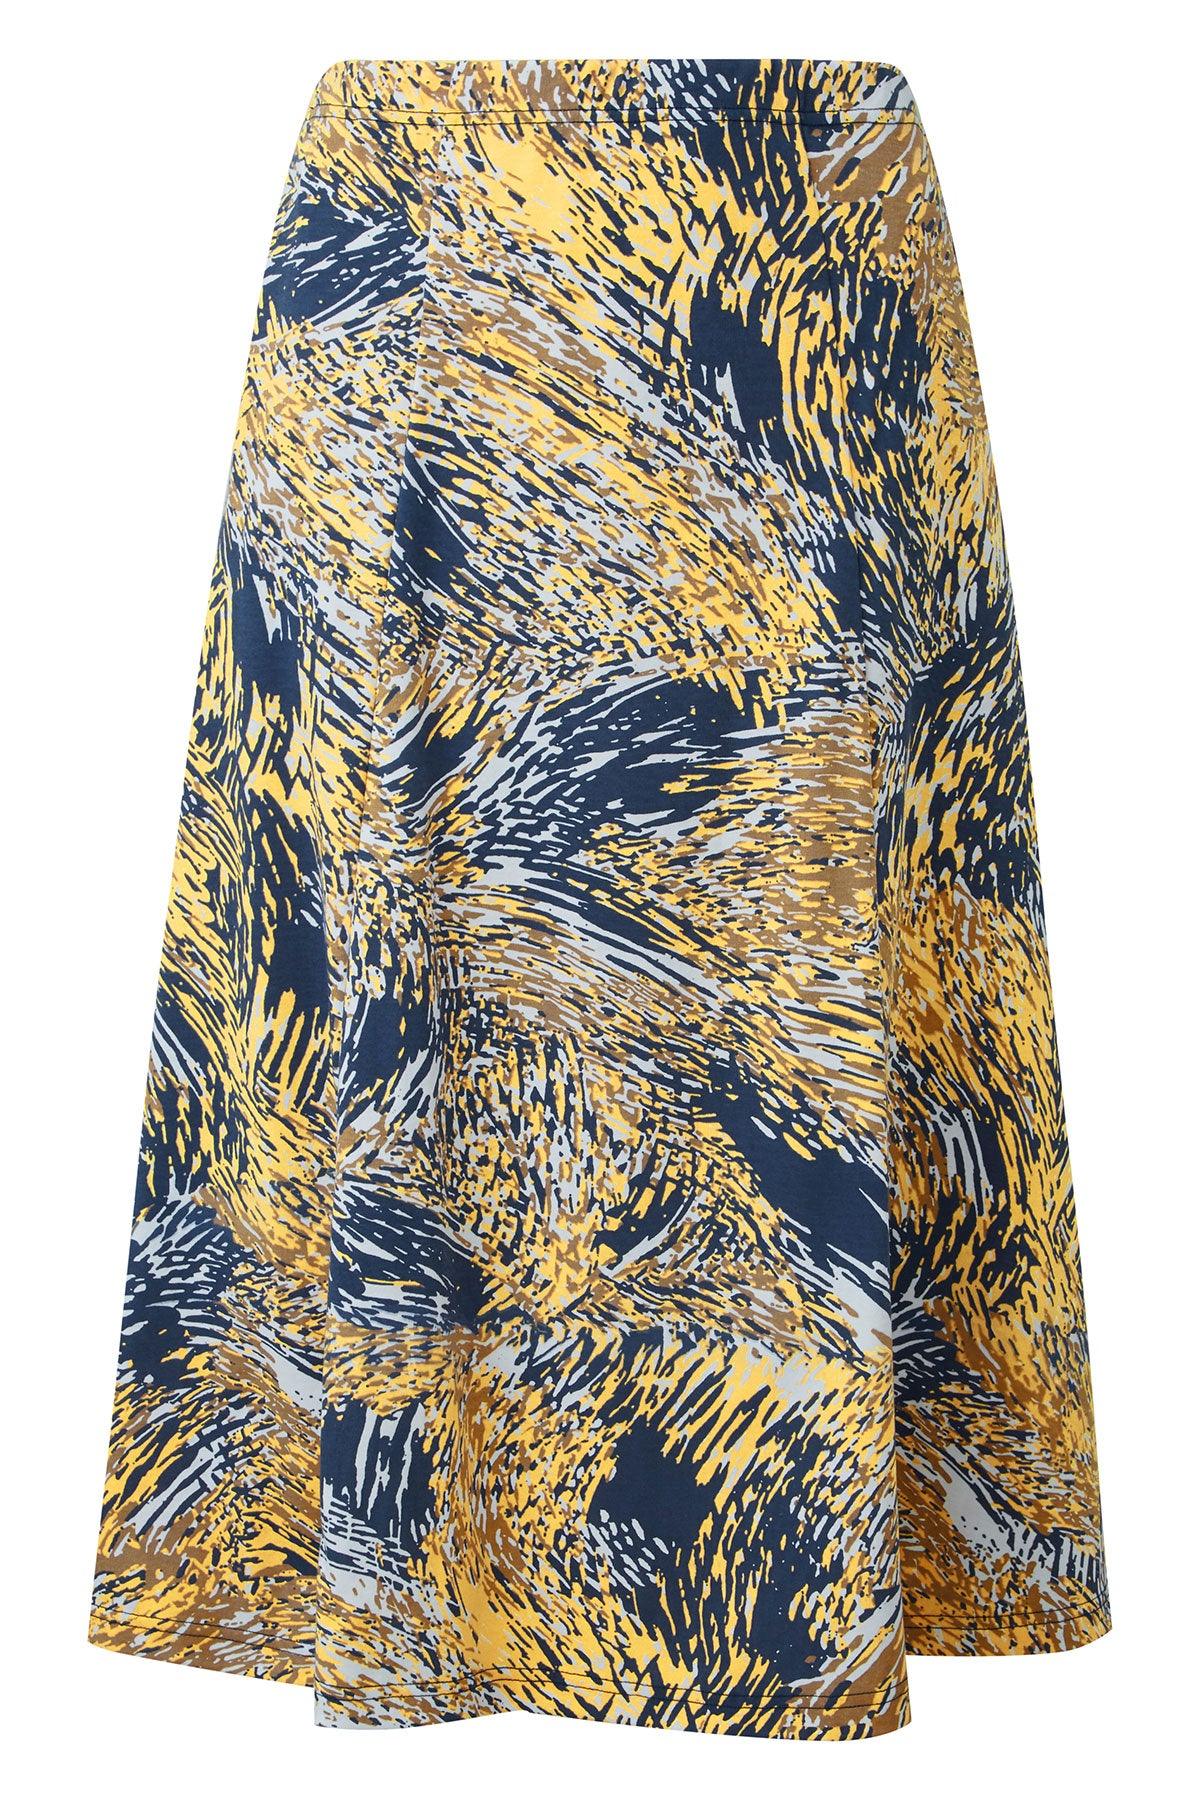 Poppy Abstract Skirt - Carr & Westley